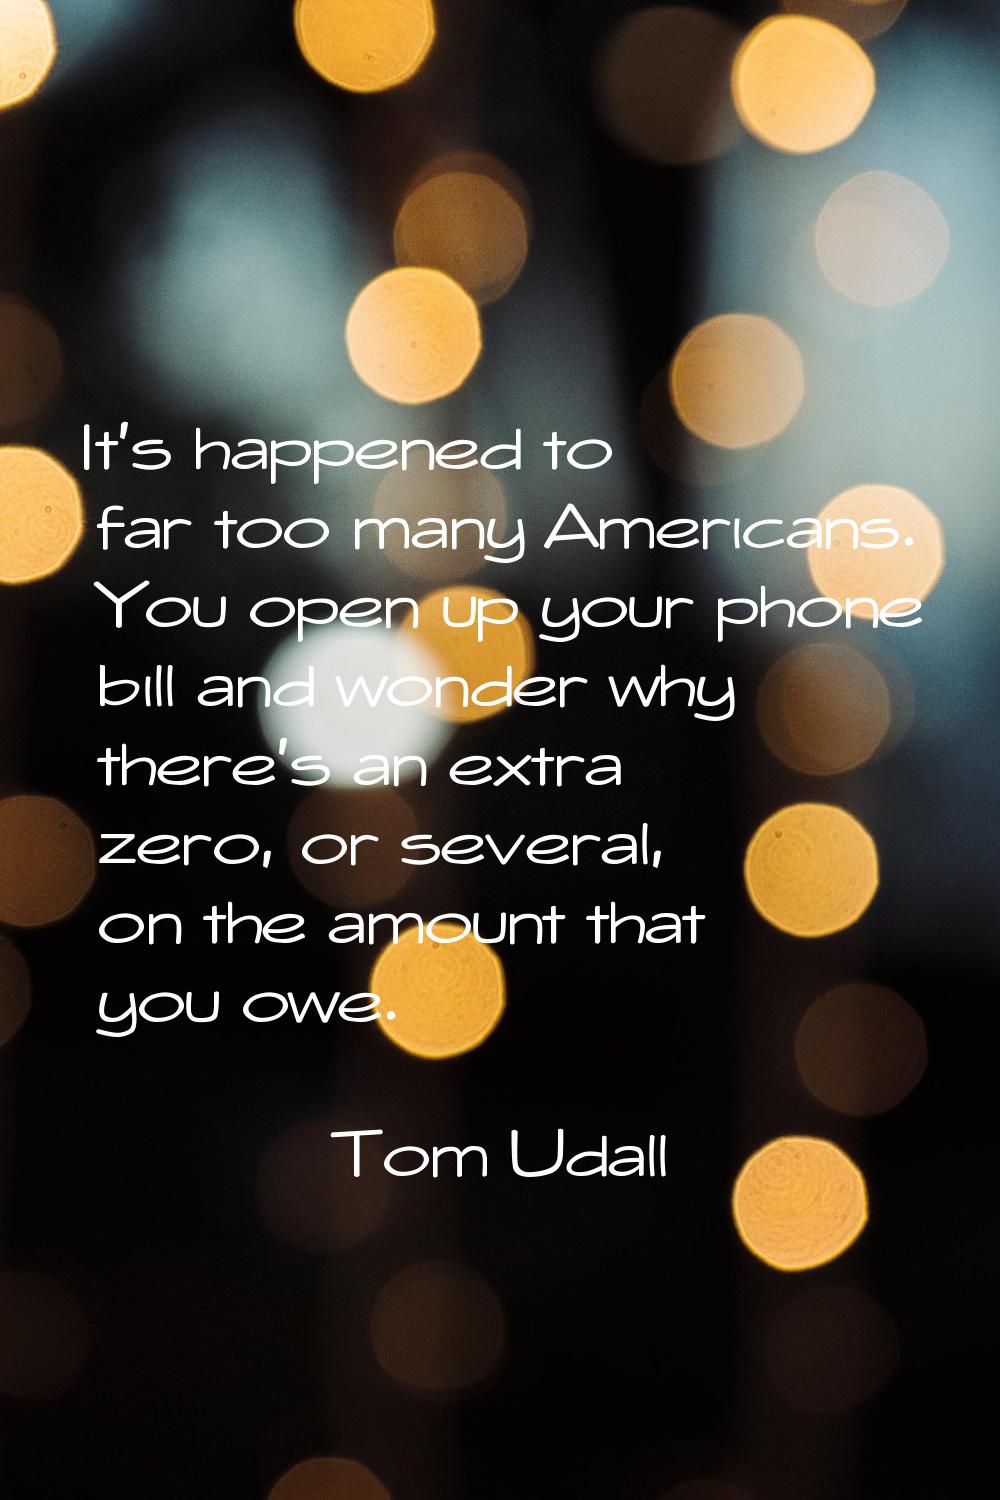 It's happened to far too many Americans. You open up your phone bill and wonder why there's an extr